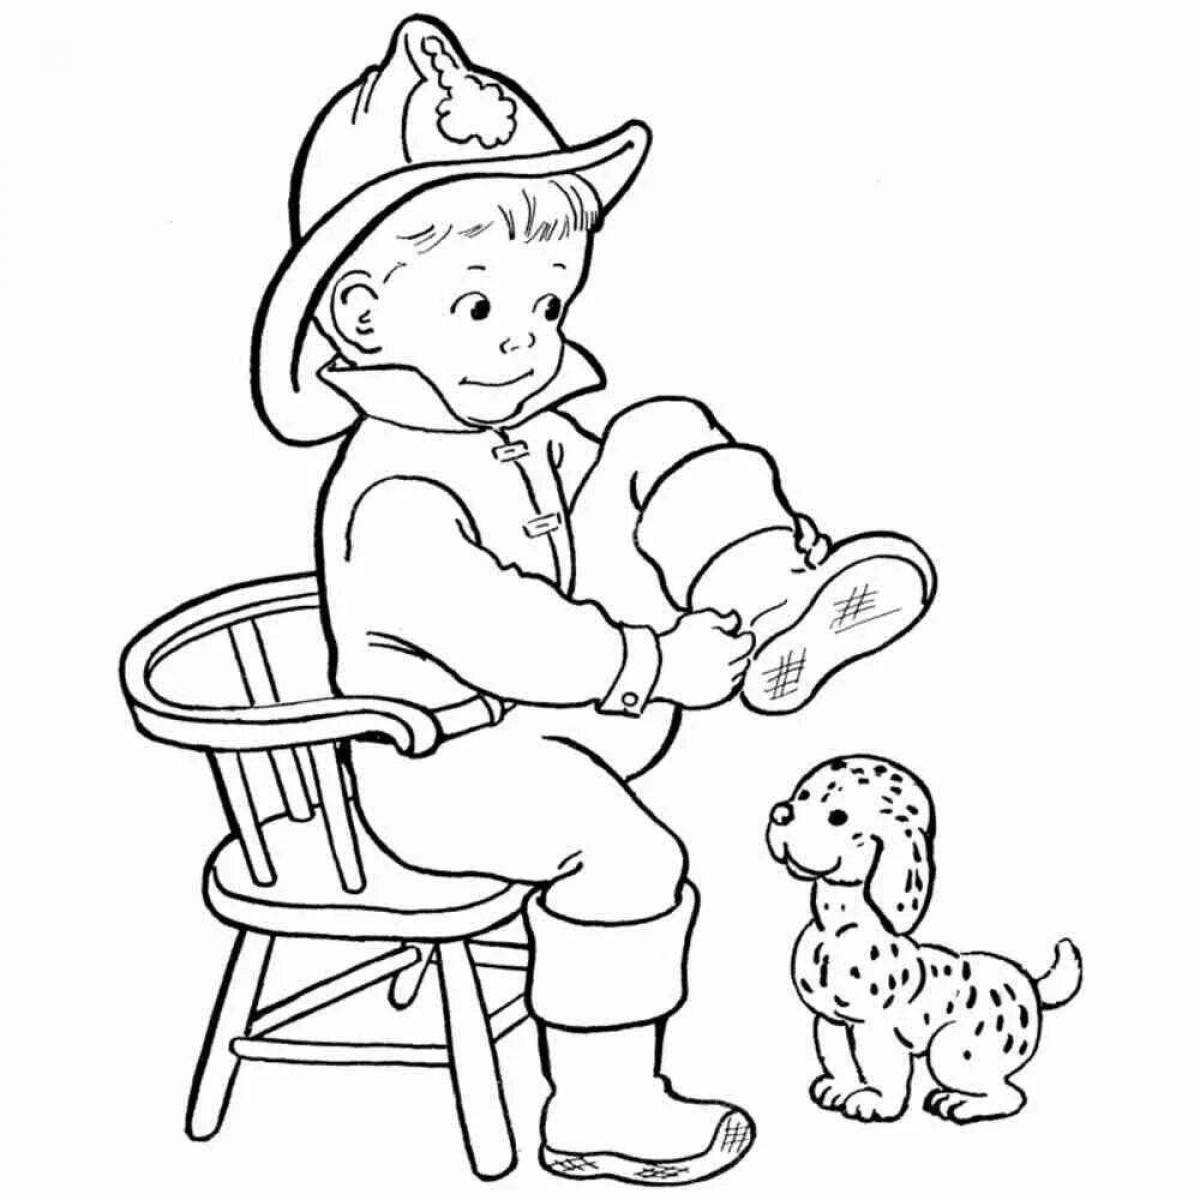 Coloring smoldering fire dog